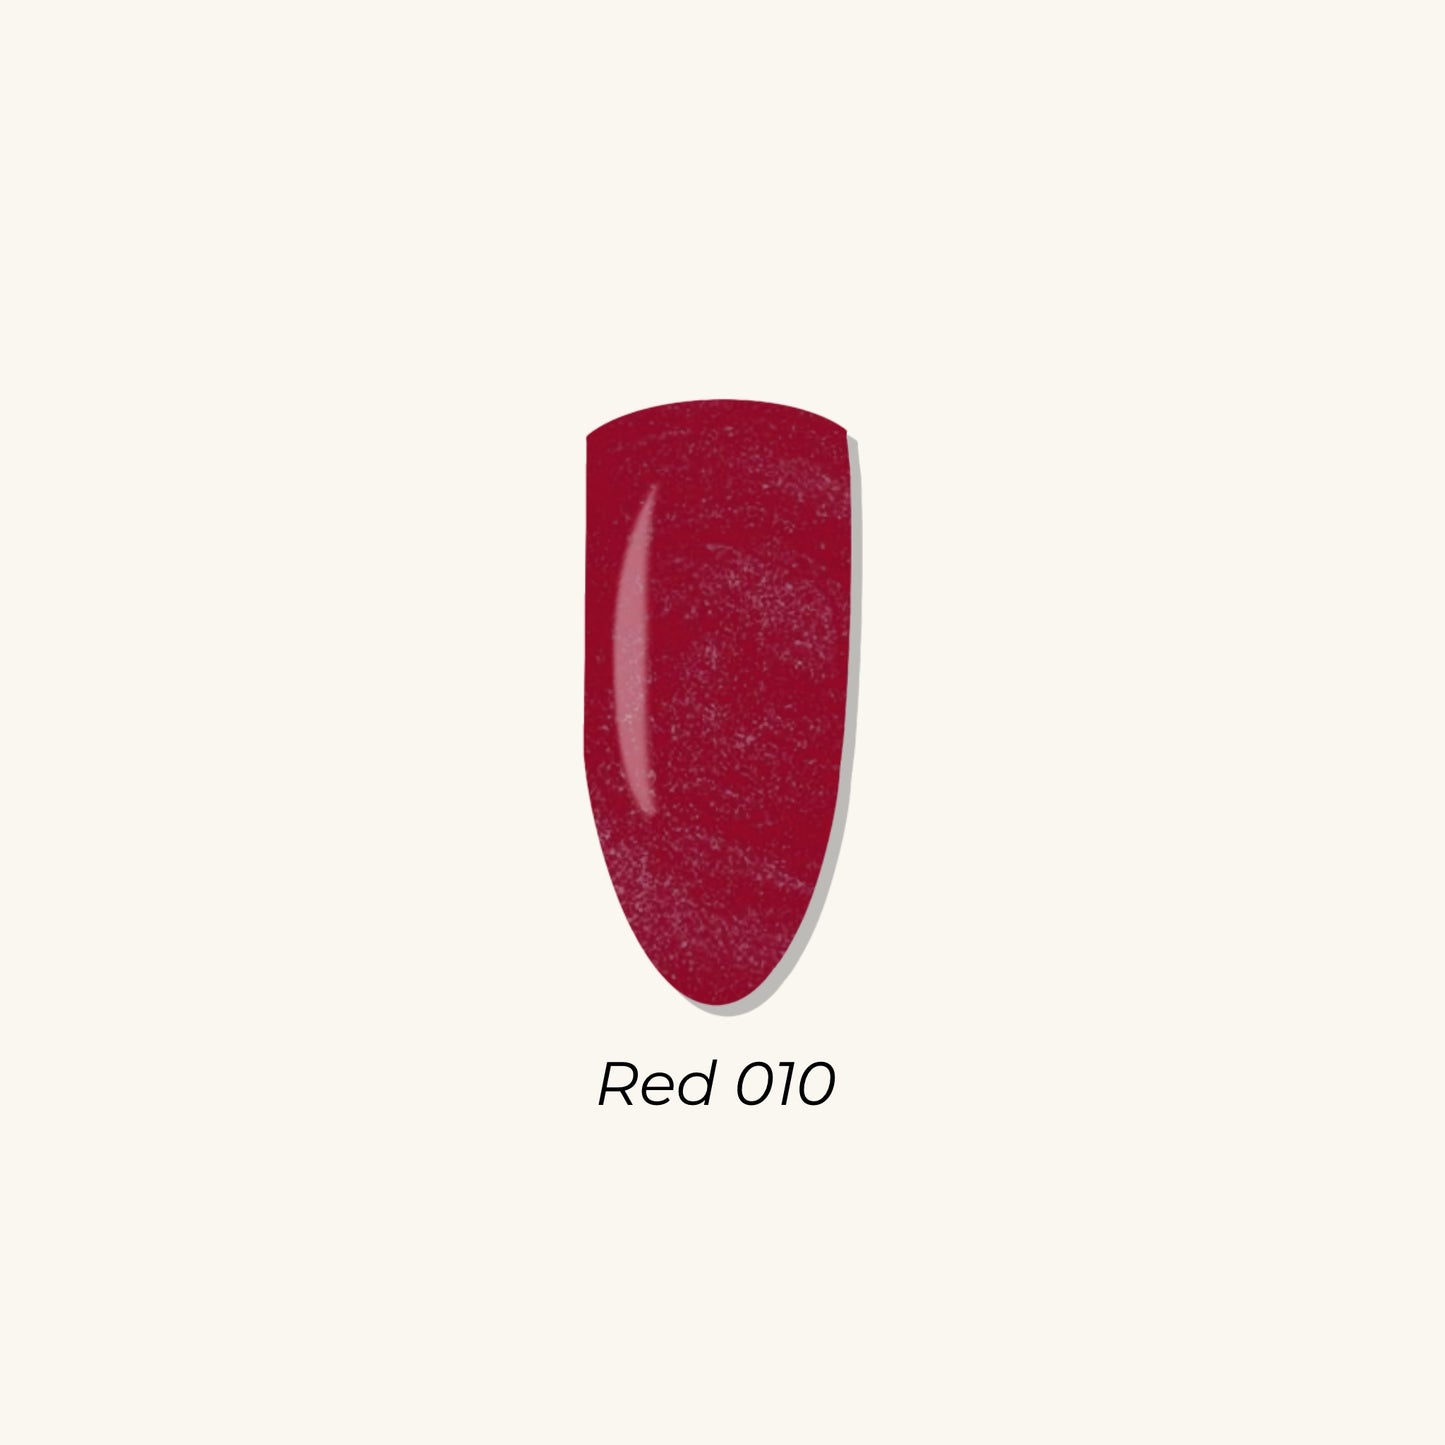 Red 010